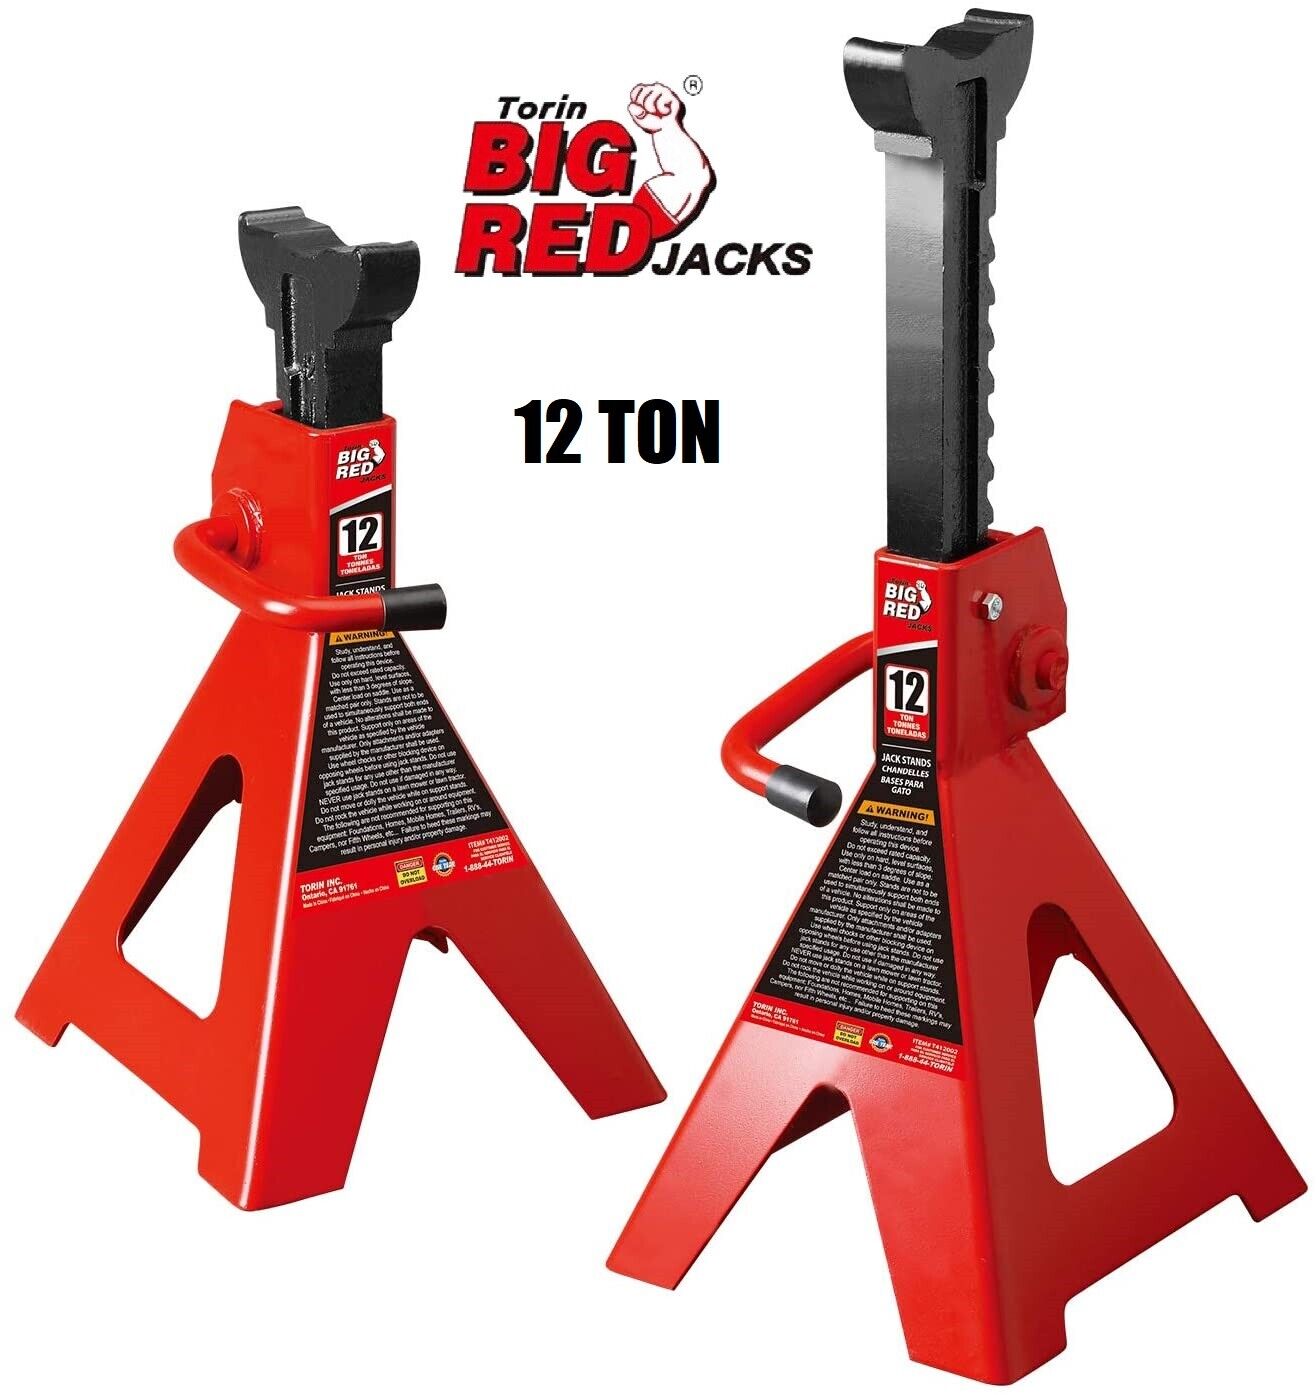 BIG RED 12 Ton (24,000 lb) Capacity 1 Pair Torin Steel Jack Stands, Red